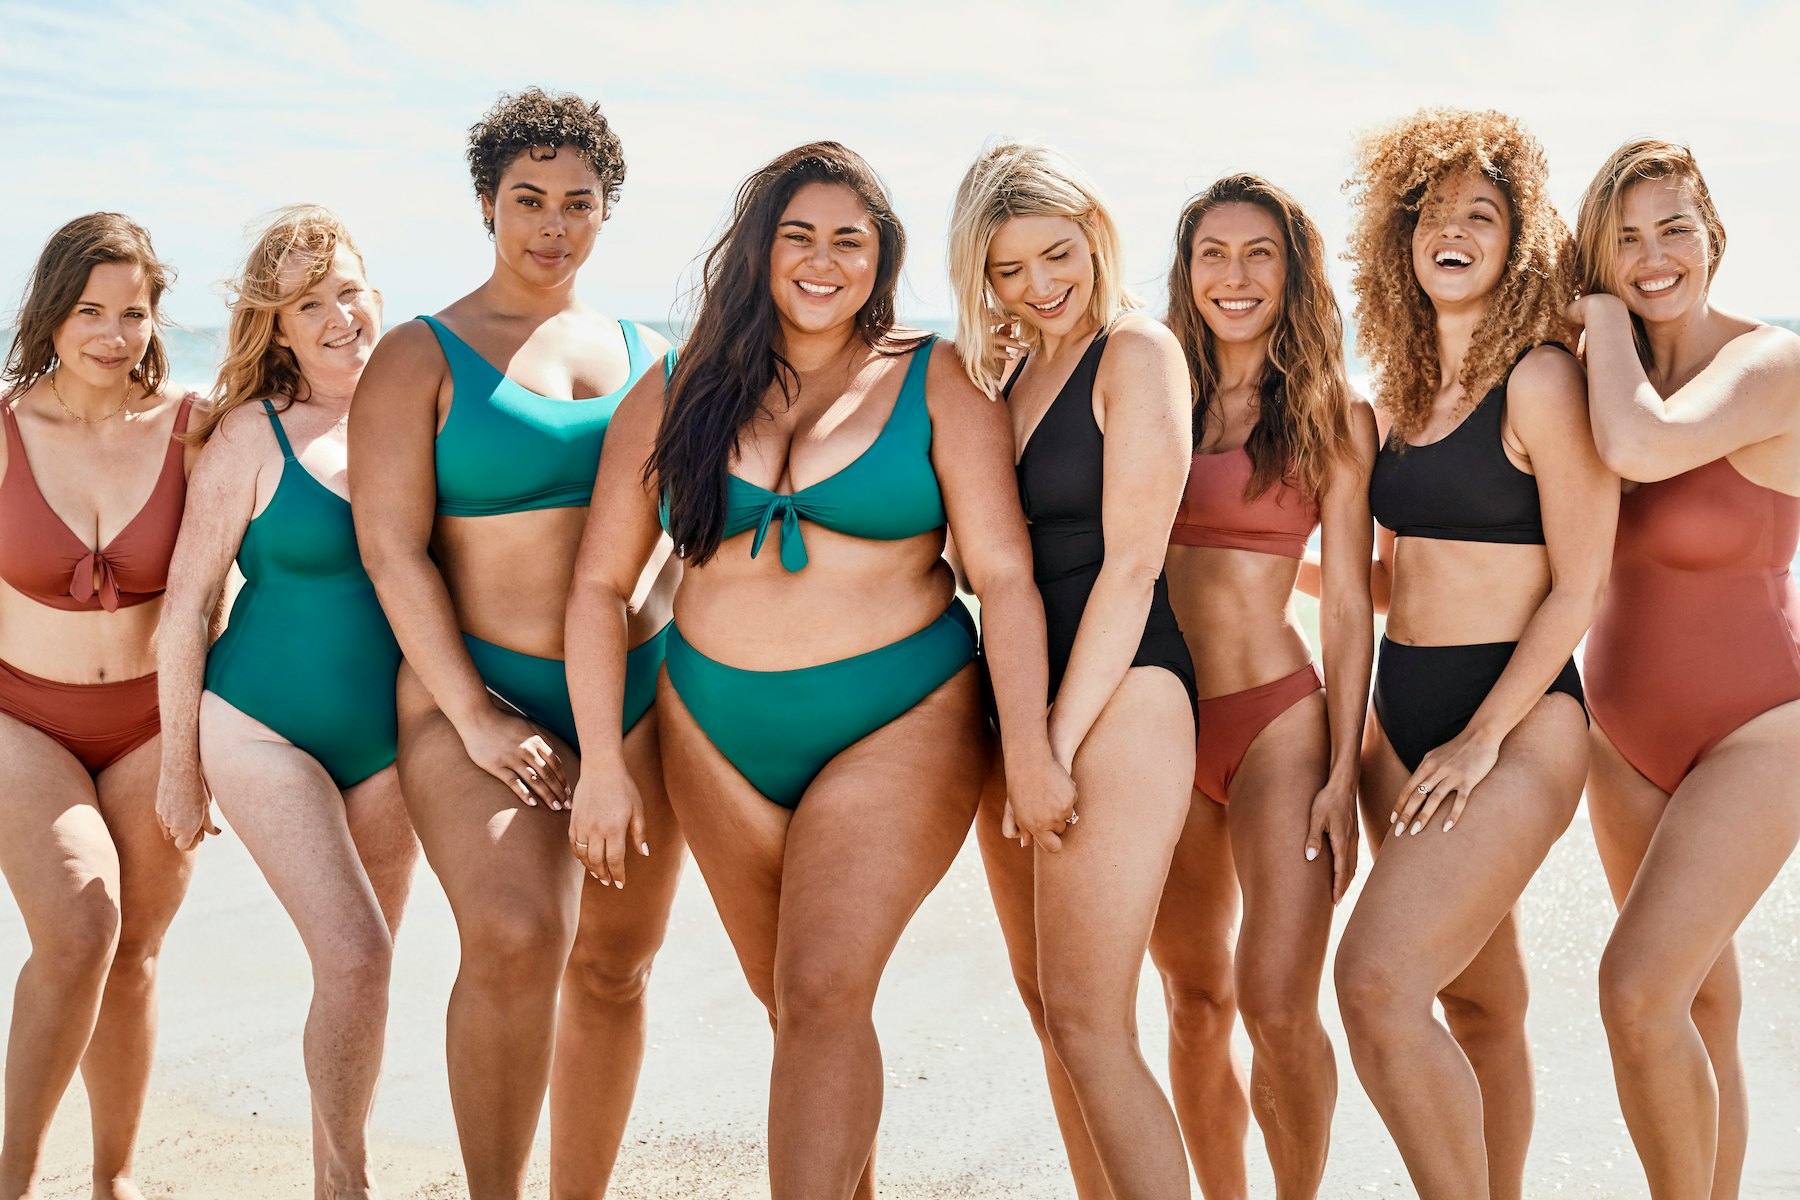 Knix's Swim Collection Just Launched For The First Time & It's As